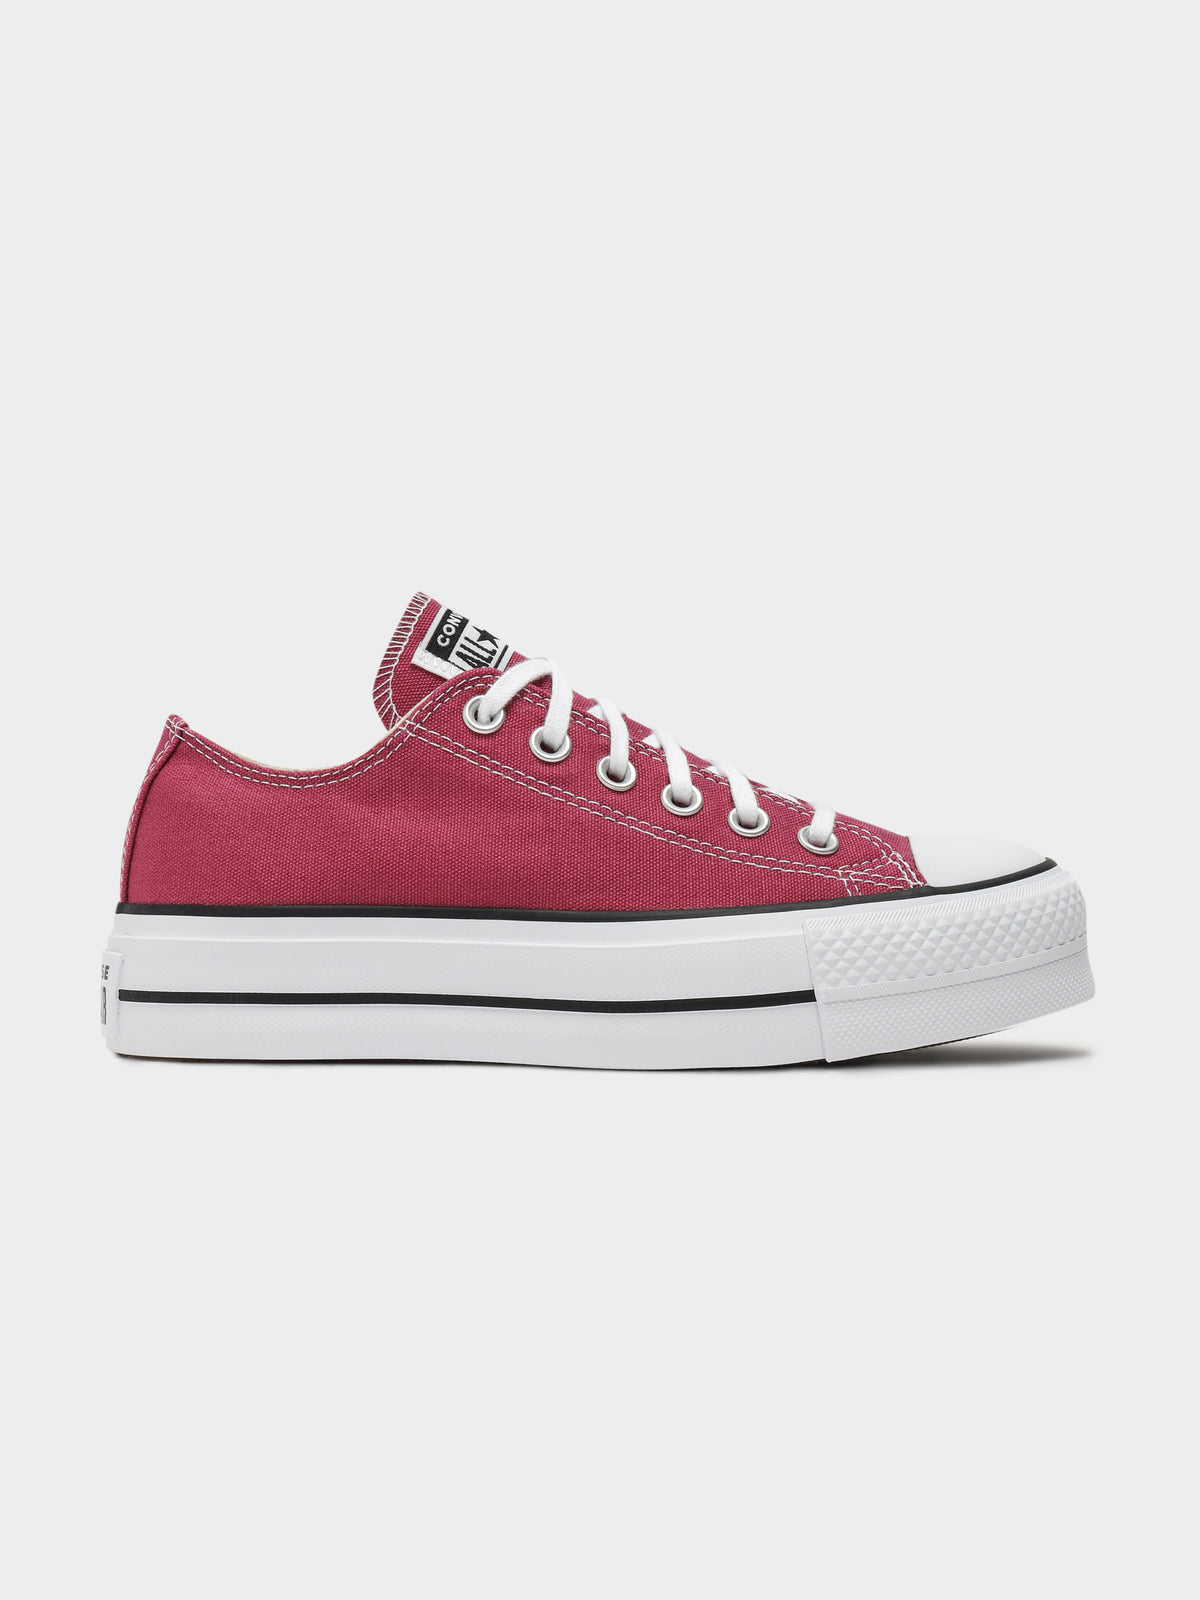 Womens Chuck Taylor All Star Lift Sneakers in Purple